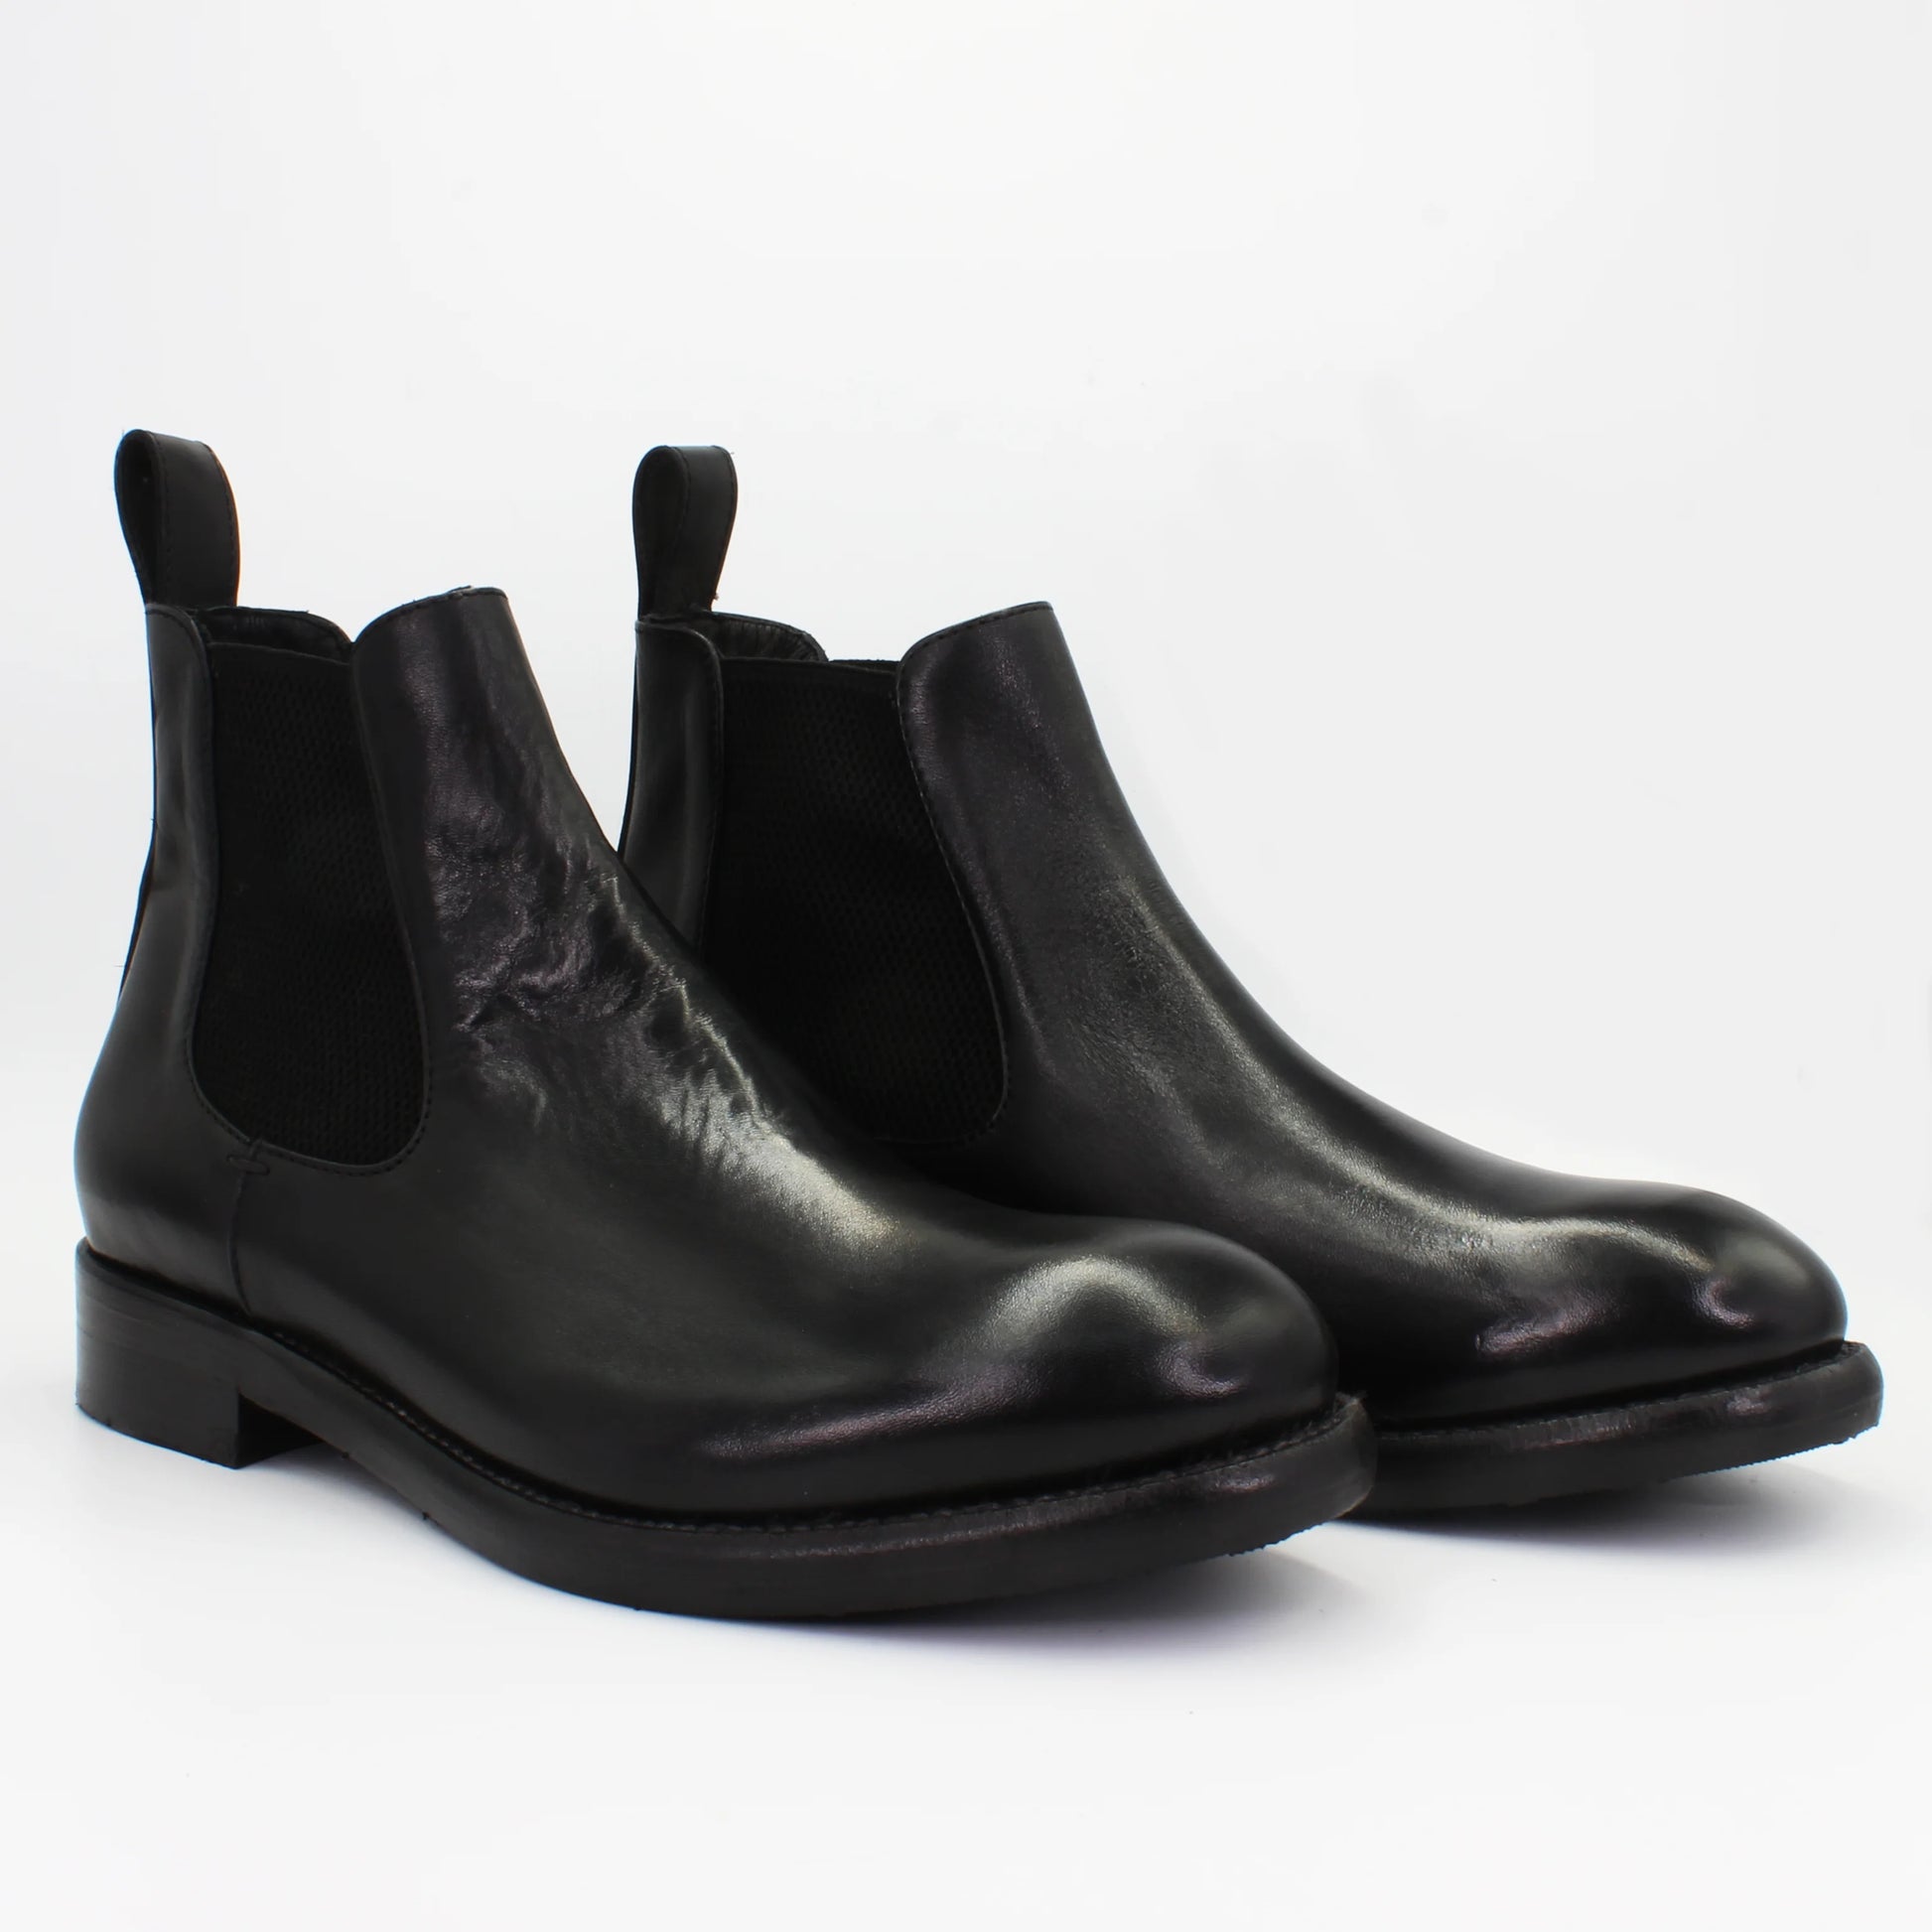 Shop Handmade Italian Leather Chelsea Boot in Nero (JP36526/20) or browse our range of hand-made Italian boots for men in leather or suede in-store at Aliverti Cape Town, or shop online. We deliver in South Africa & offer multiple payment plans as well as accept multiple safe & secure payment methods.